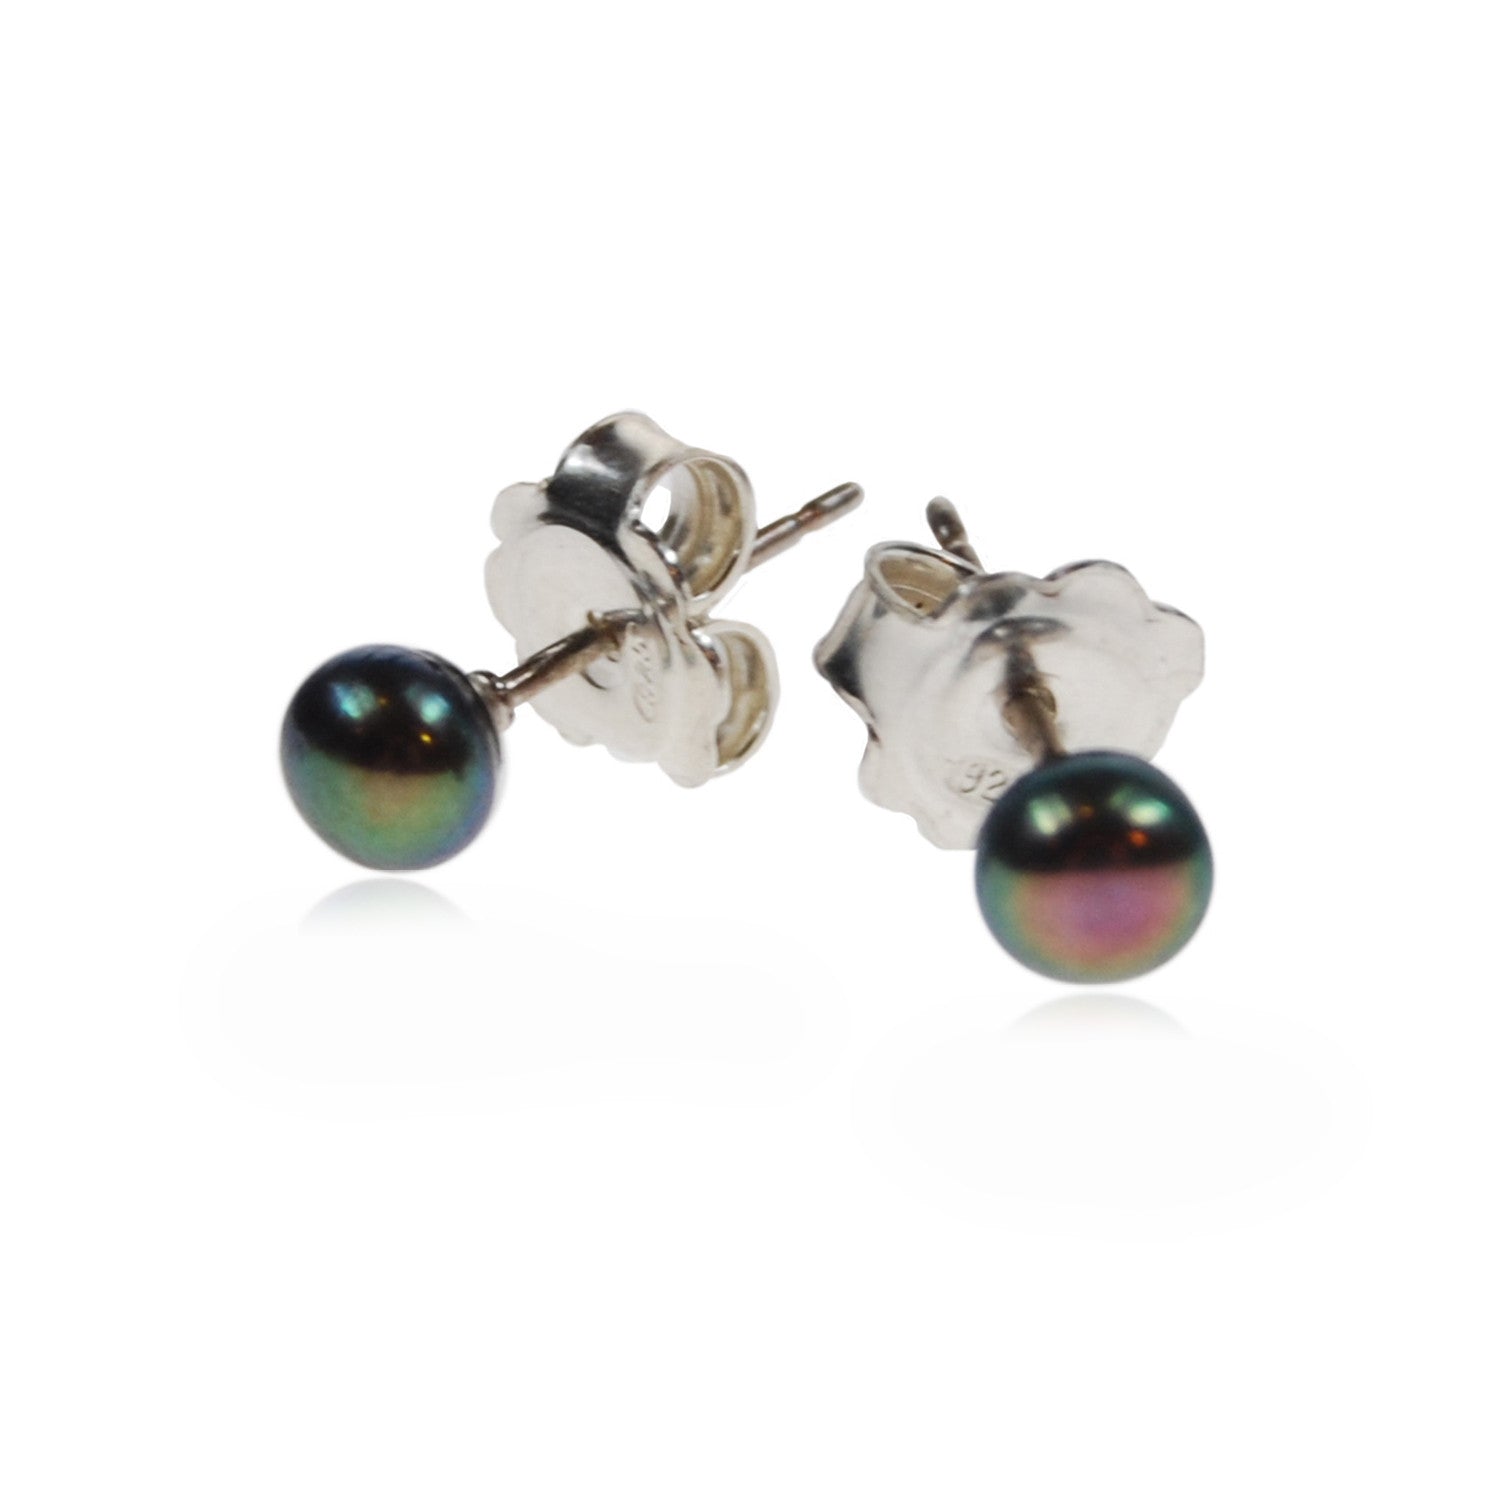 Petite Freshwater Pearl Studs on Silver Posts in Peacock Black